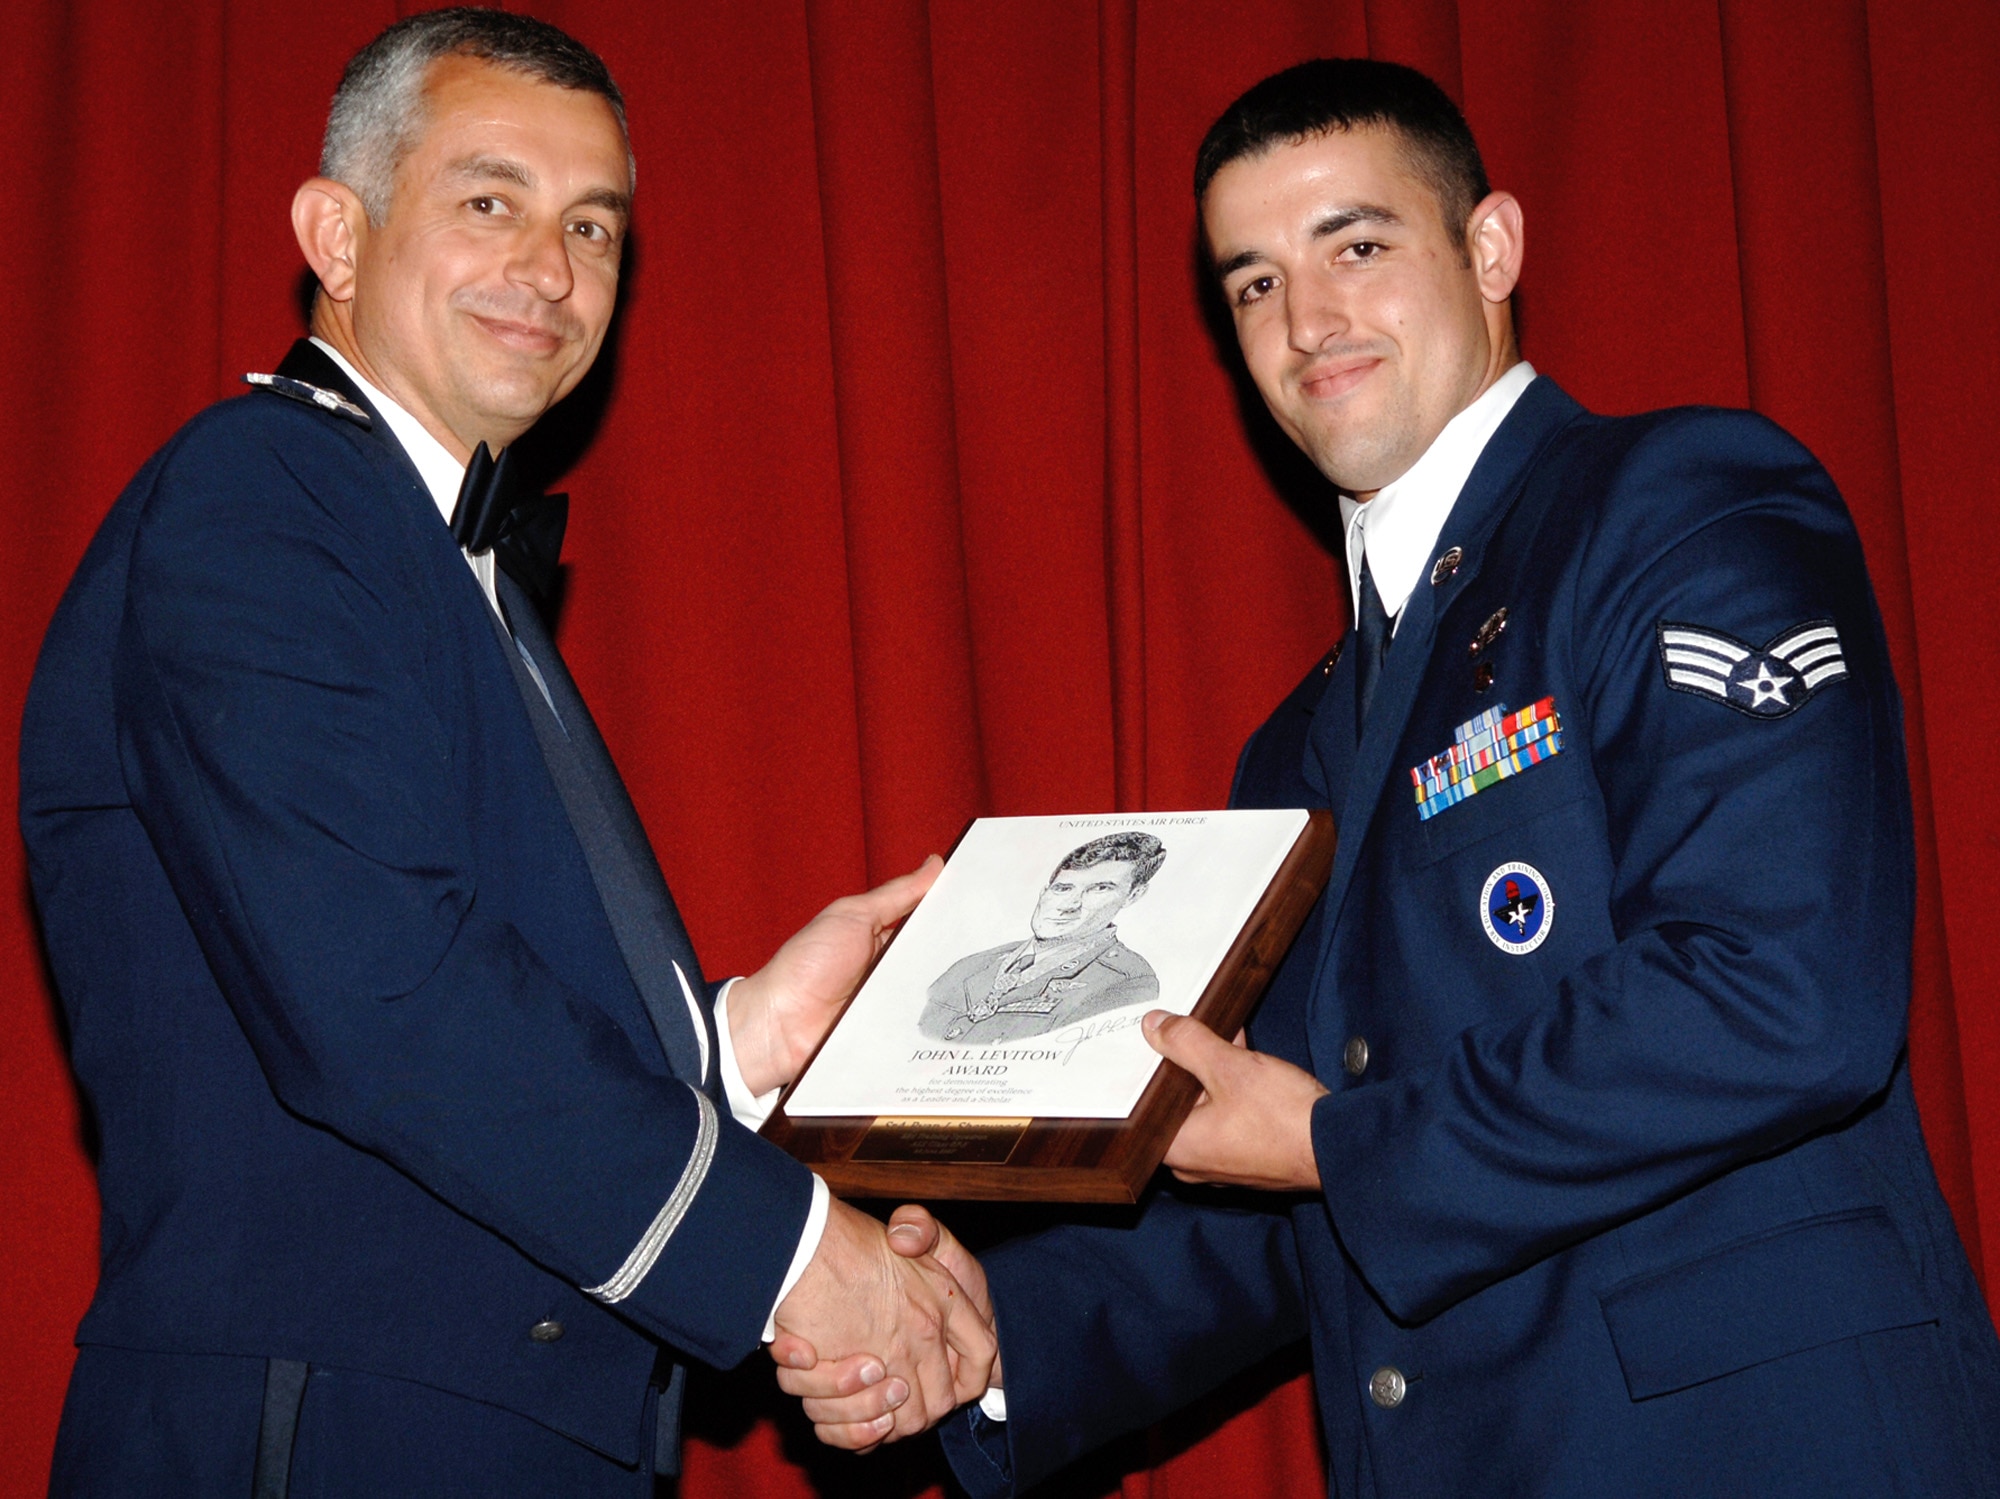 FAIRCHILD AIR FORCE BASE, Wash. -- Col. Roger Watkins, 92nd Air Refueling Wing vice commander, presents Senior Airman Ryan Sherwood with the John L. Levitow Award at the Airmen Leadership School graduation June 28. Airman Sherwood was presented with the award because of his support, interpersonal relationships and professionalism as an Airman. (U.S. Air Force photo/Airman 1st Class Nancy Hooks)